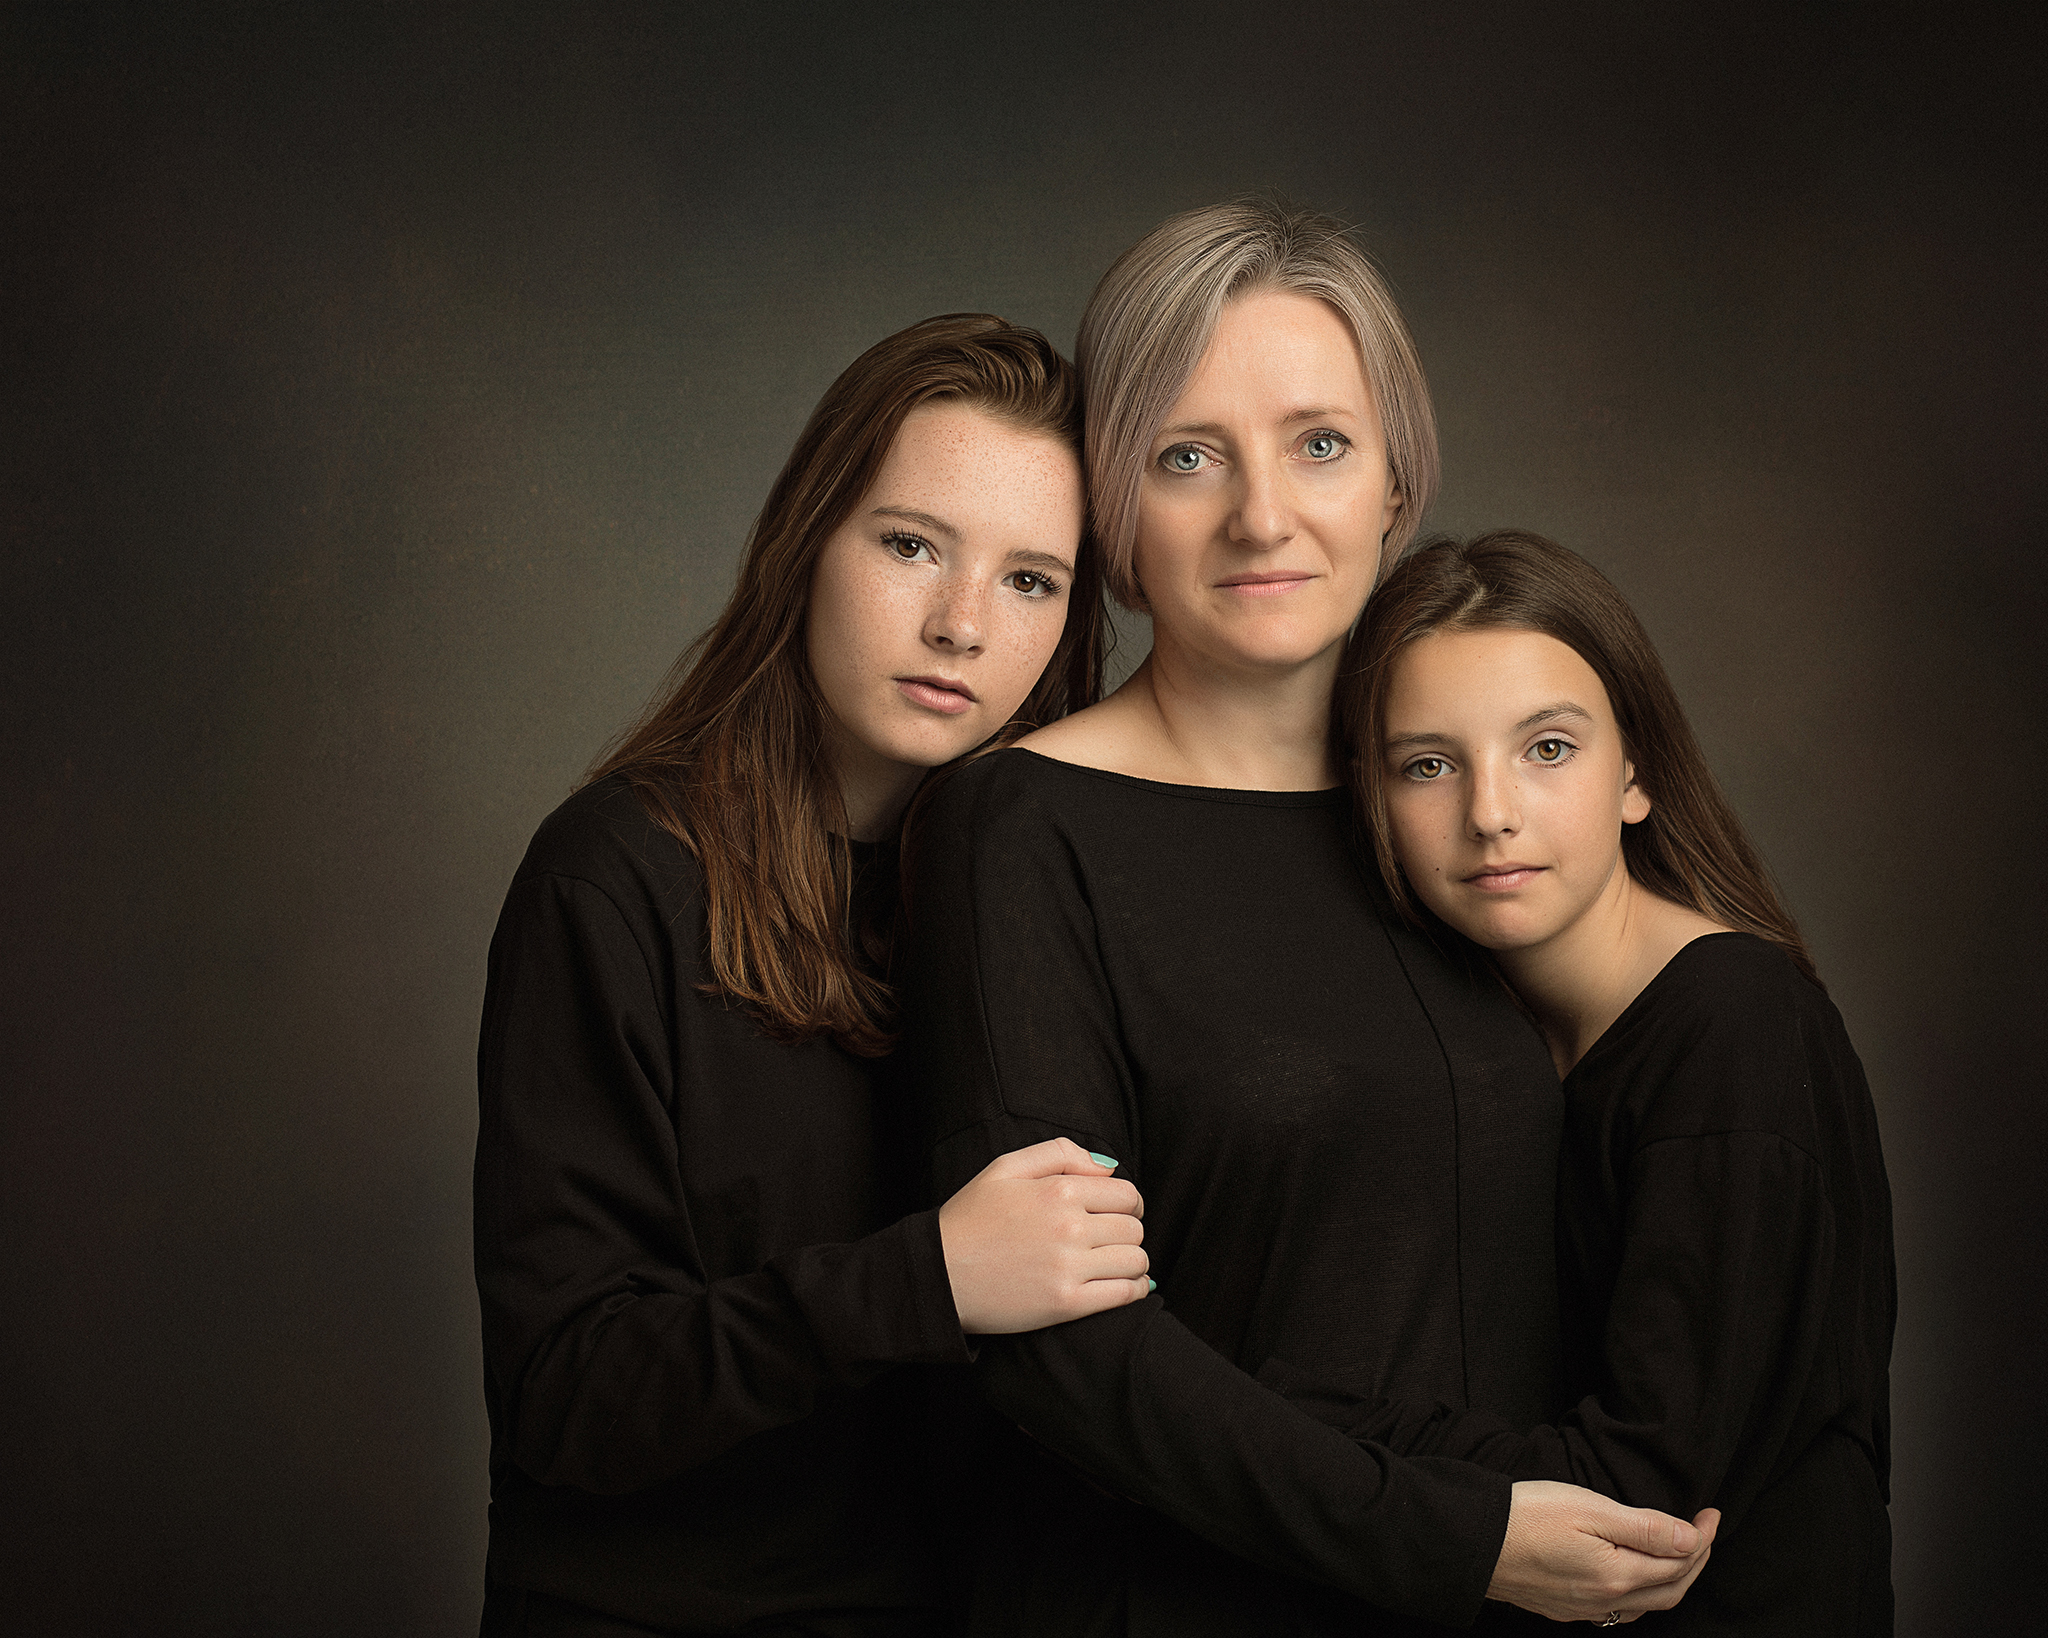 mum and daughters fine art portrait in studio by Family photographer Lancashire